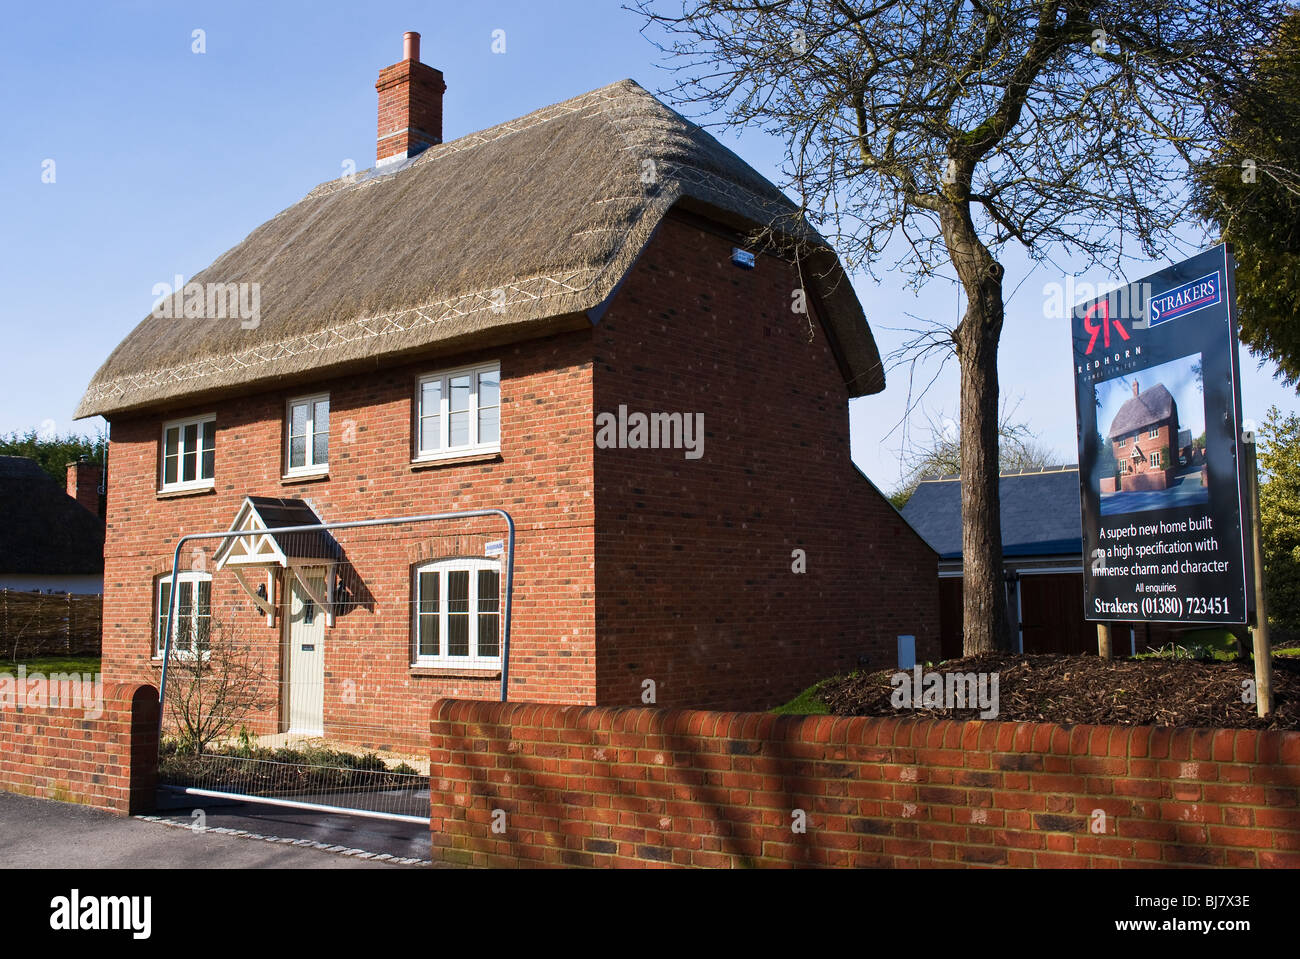 New thatched house For Sale in Urchfont village Wiltshire England UK EU viewed from public highway Stock Photo